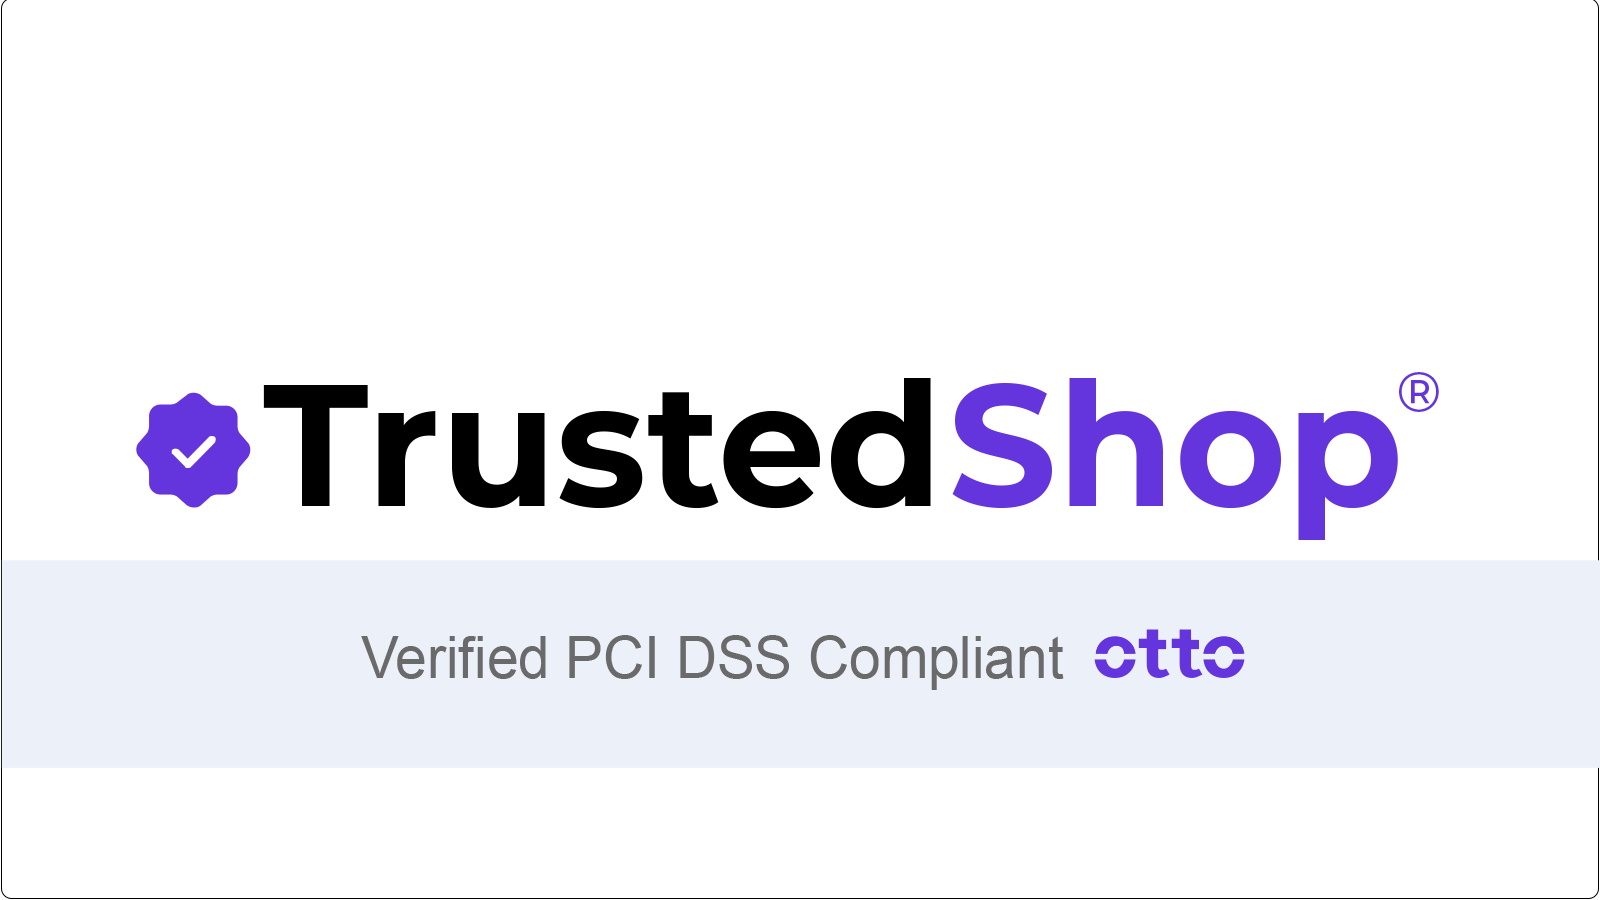 TrustedShop PCI Verified Badge gives customers confidence